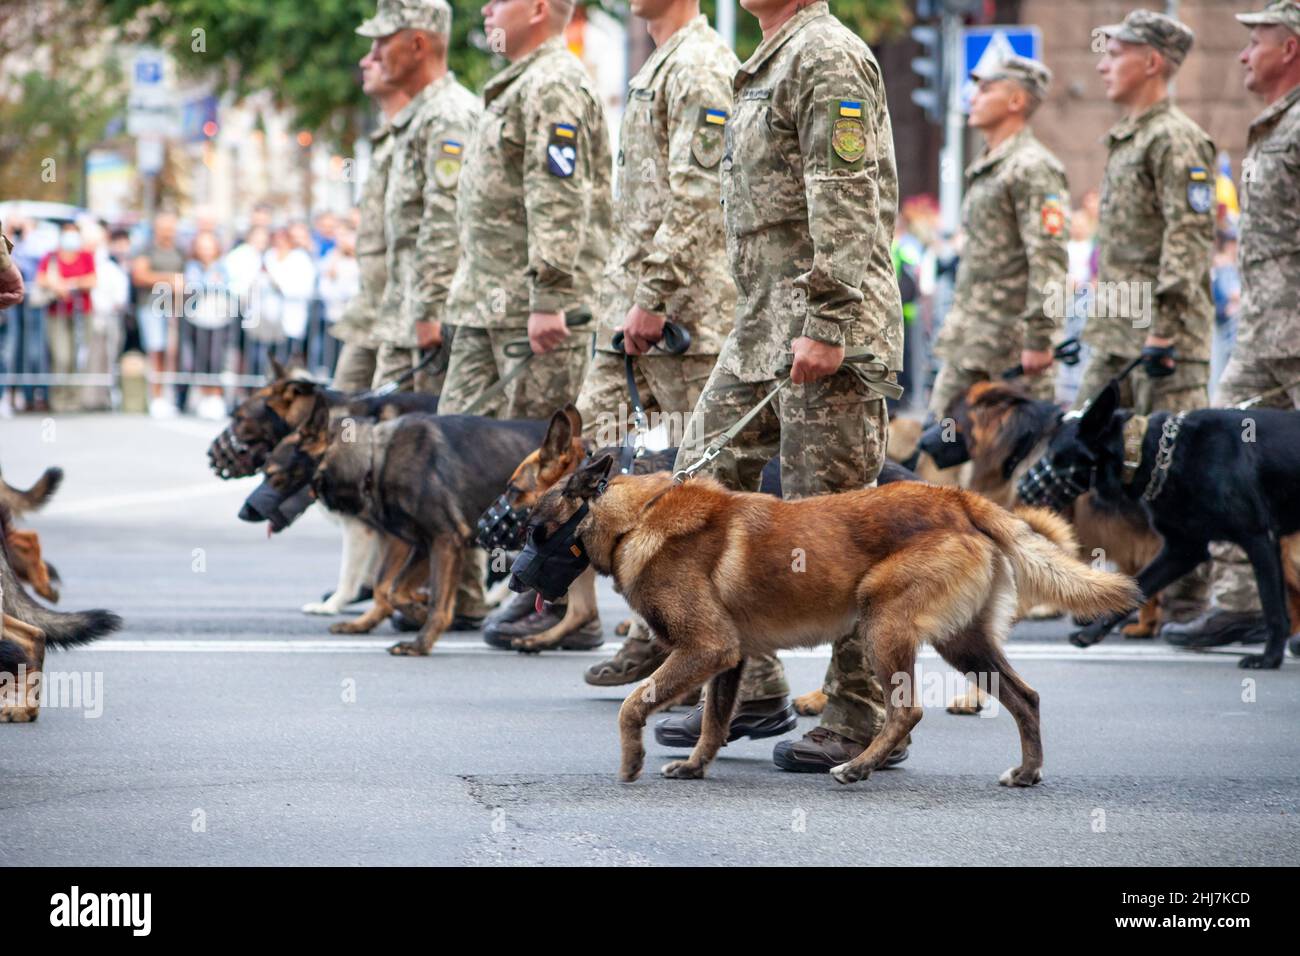 Ukraine, Kiev - August 18, 2020: Border guards with shepherd dogs. The military at the parade. A soldier with a watchdog. Service dog shepherd in the service of the state. The soldiers are marching. Stock Photo